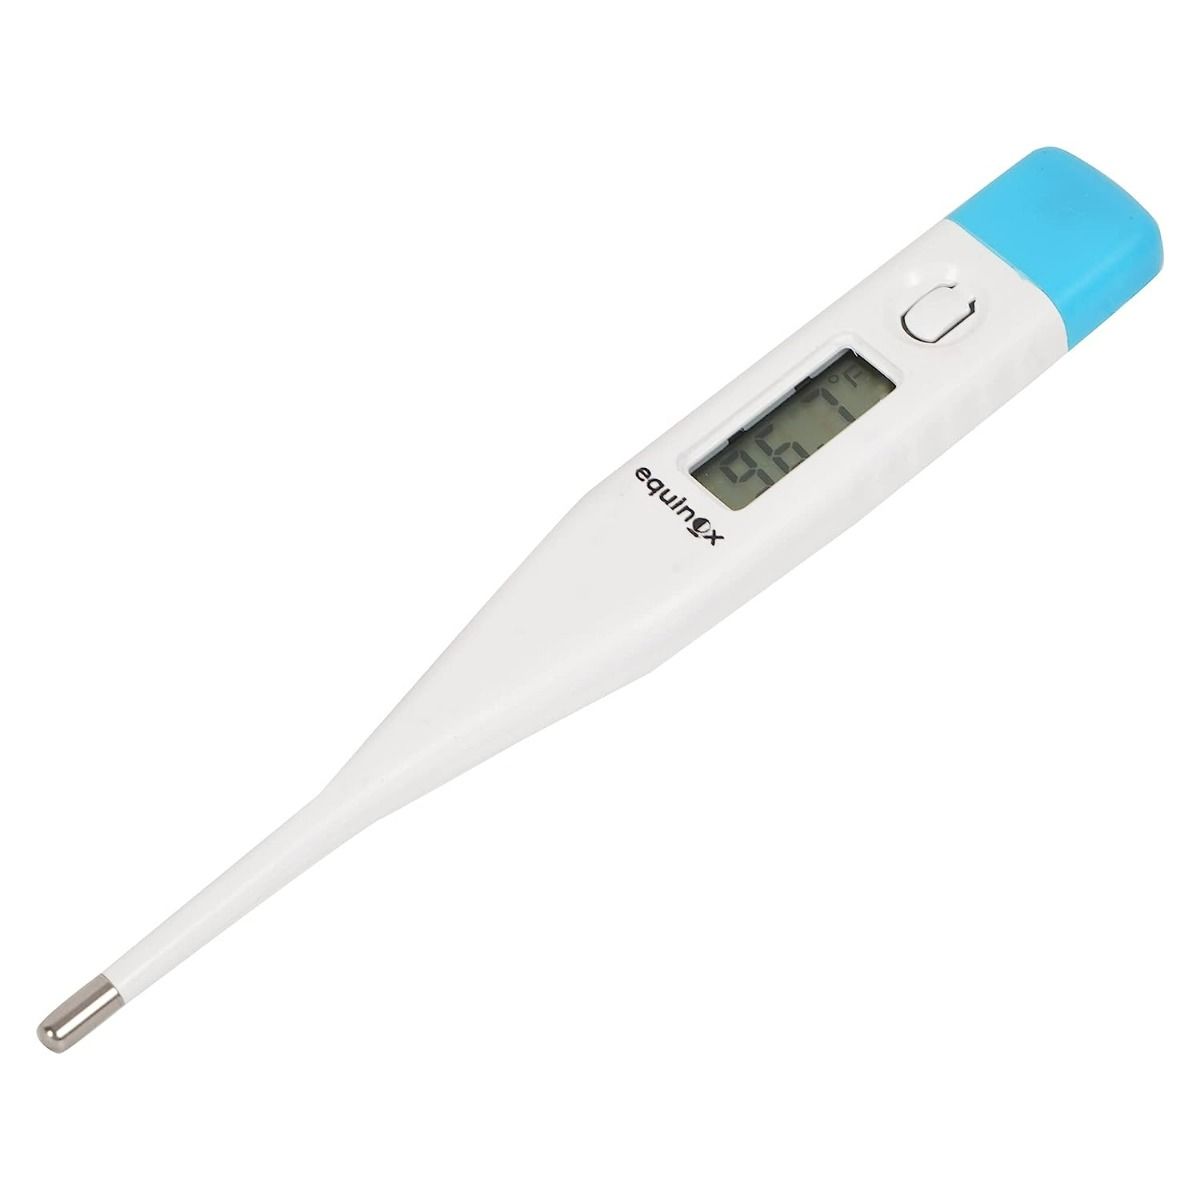 Hicks DMT 102 Digital Thermometer with Memory & Beeper - Auto Shut